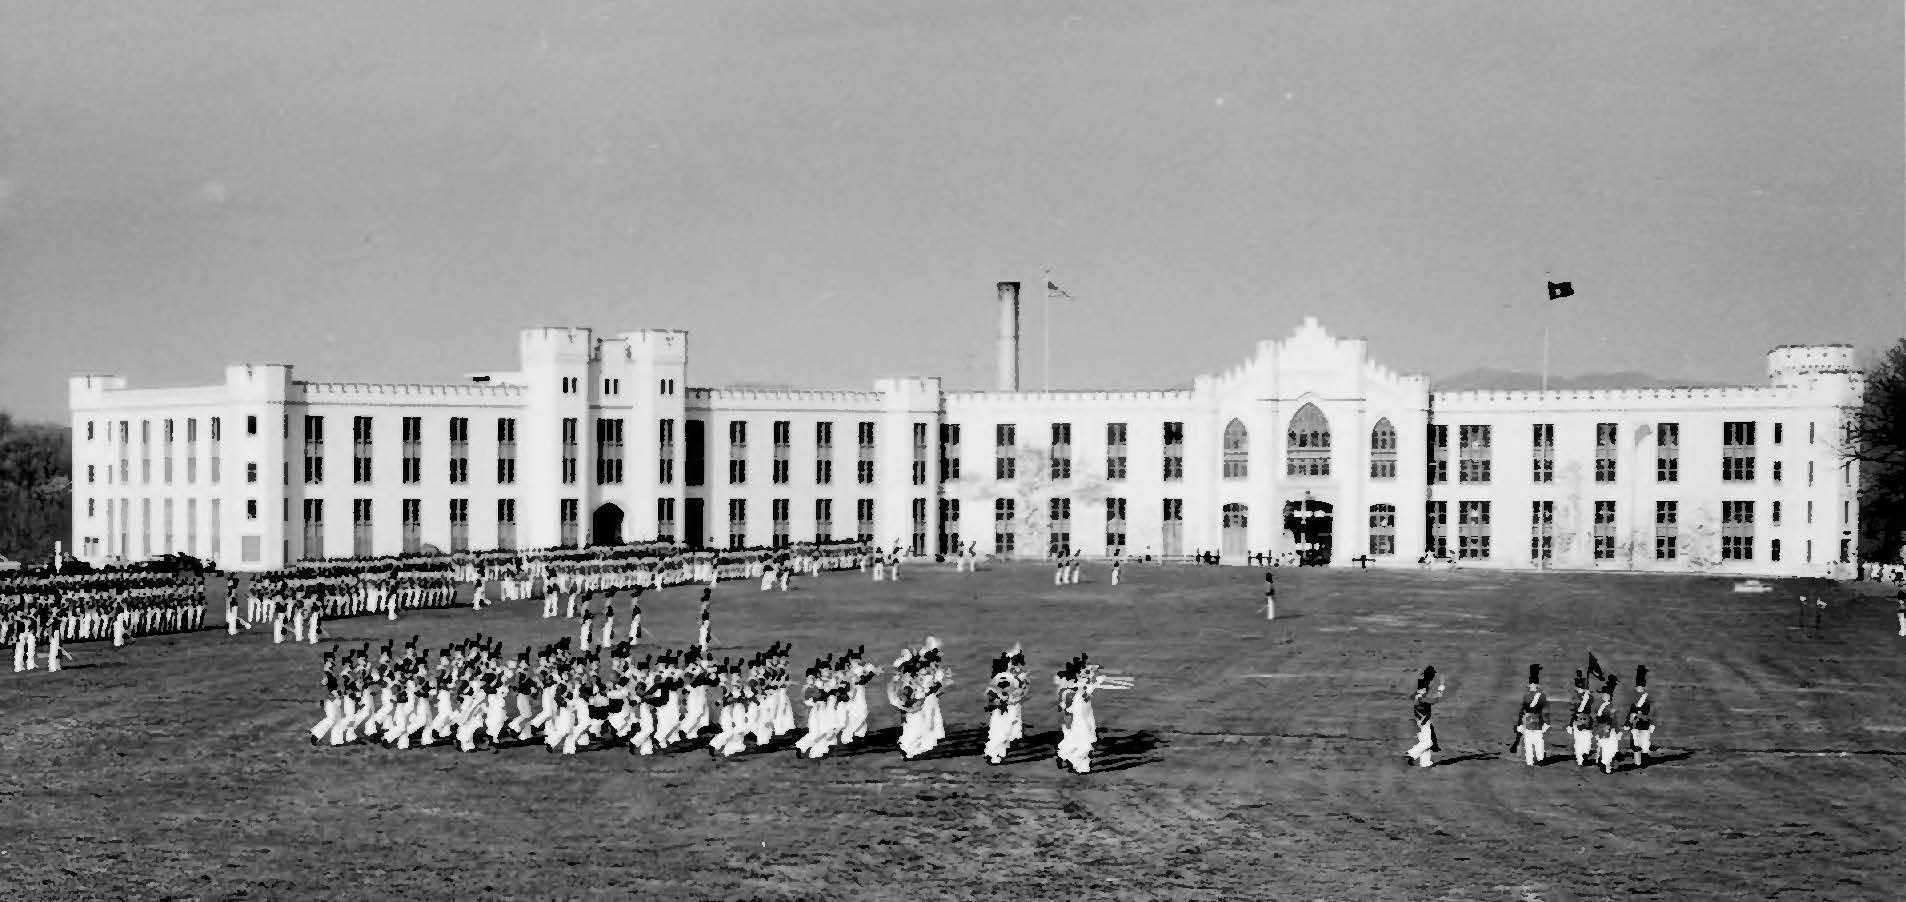 117-0017_VirginiaMilitaryInstituteHD_1972_Photo_Parade_Grounds_VLR_Online